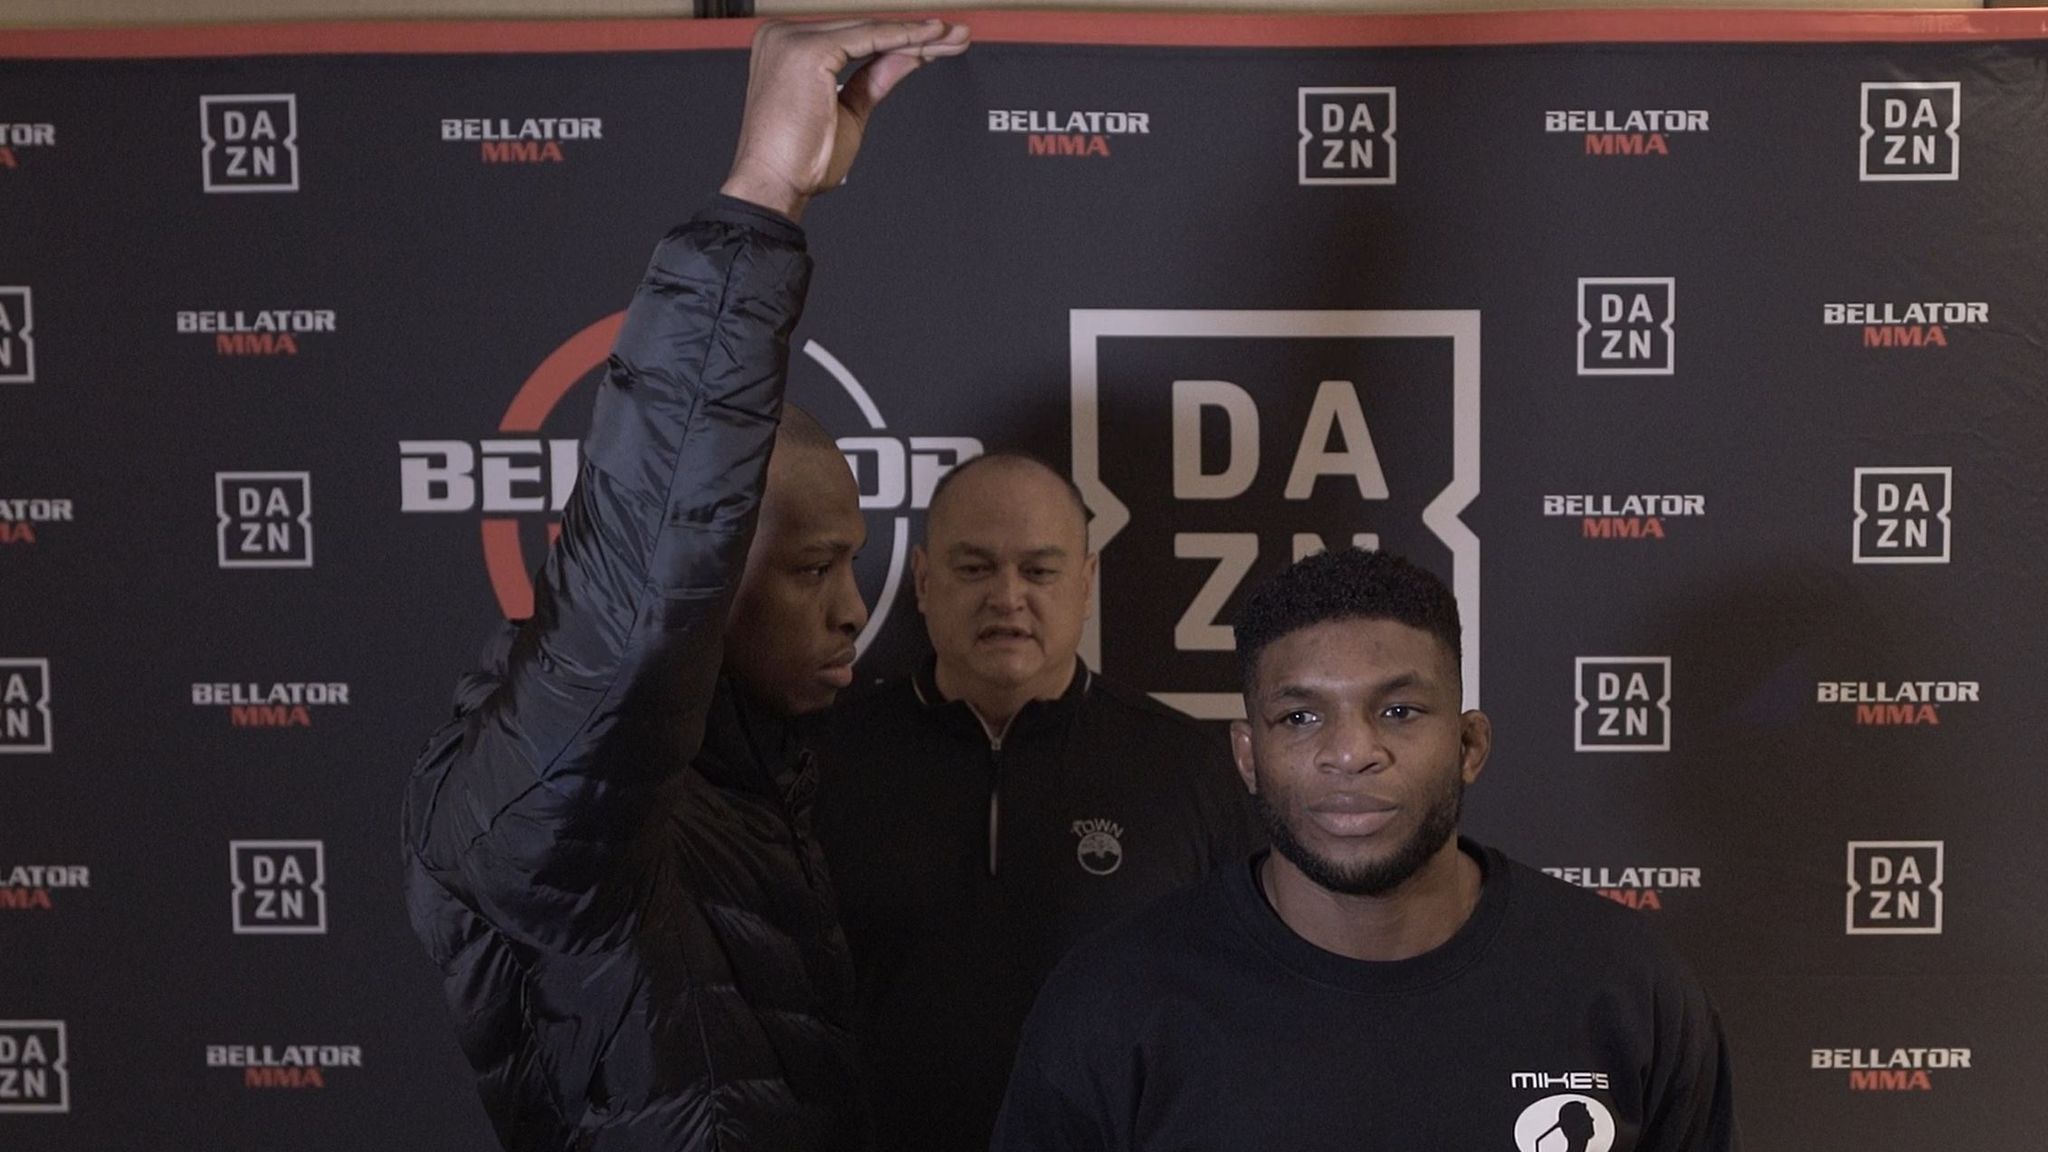 Michael Venom Page and Paul Daley face off ahead of Bellator MMA fight News Sky Sports